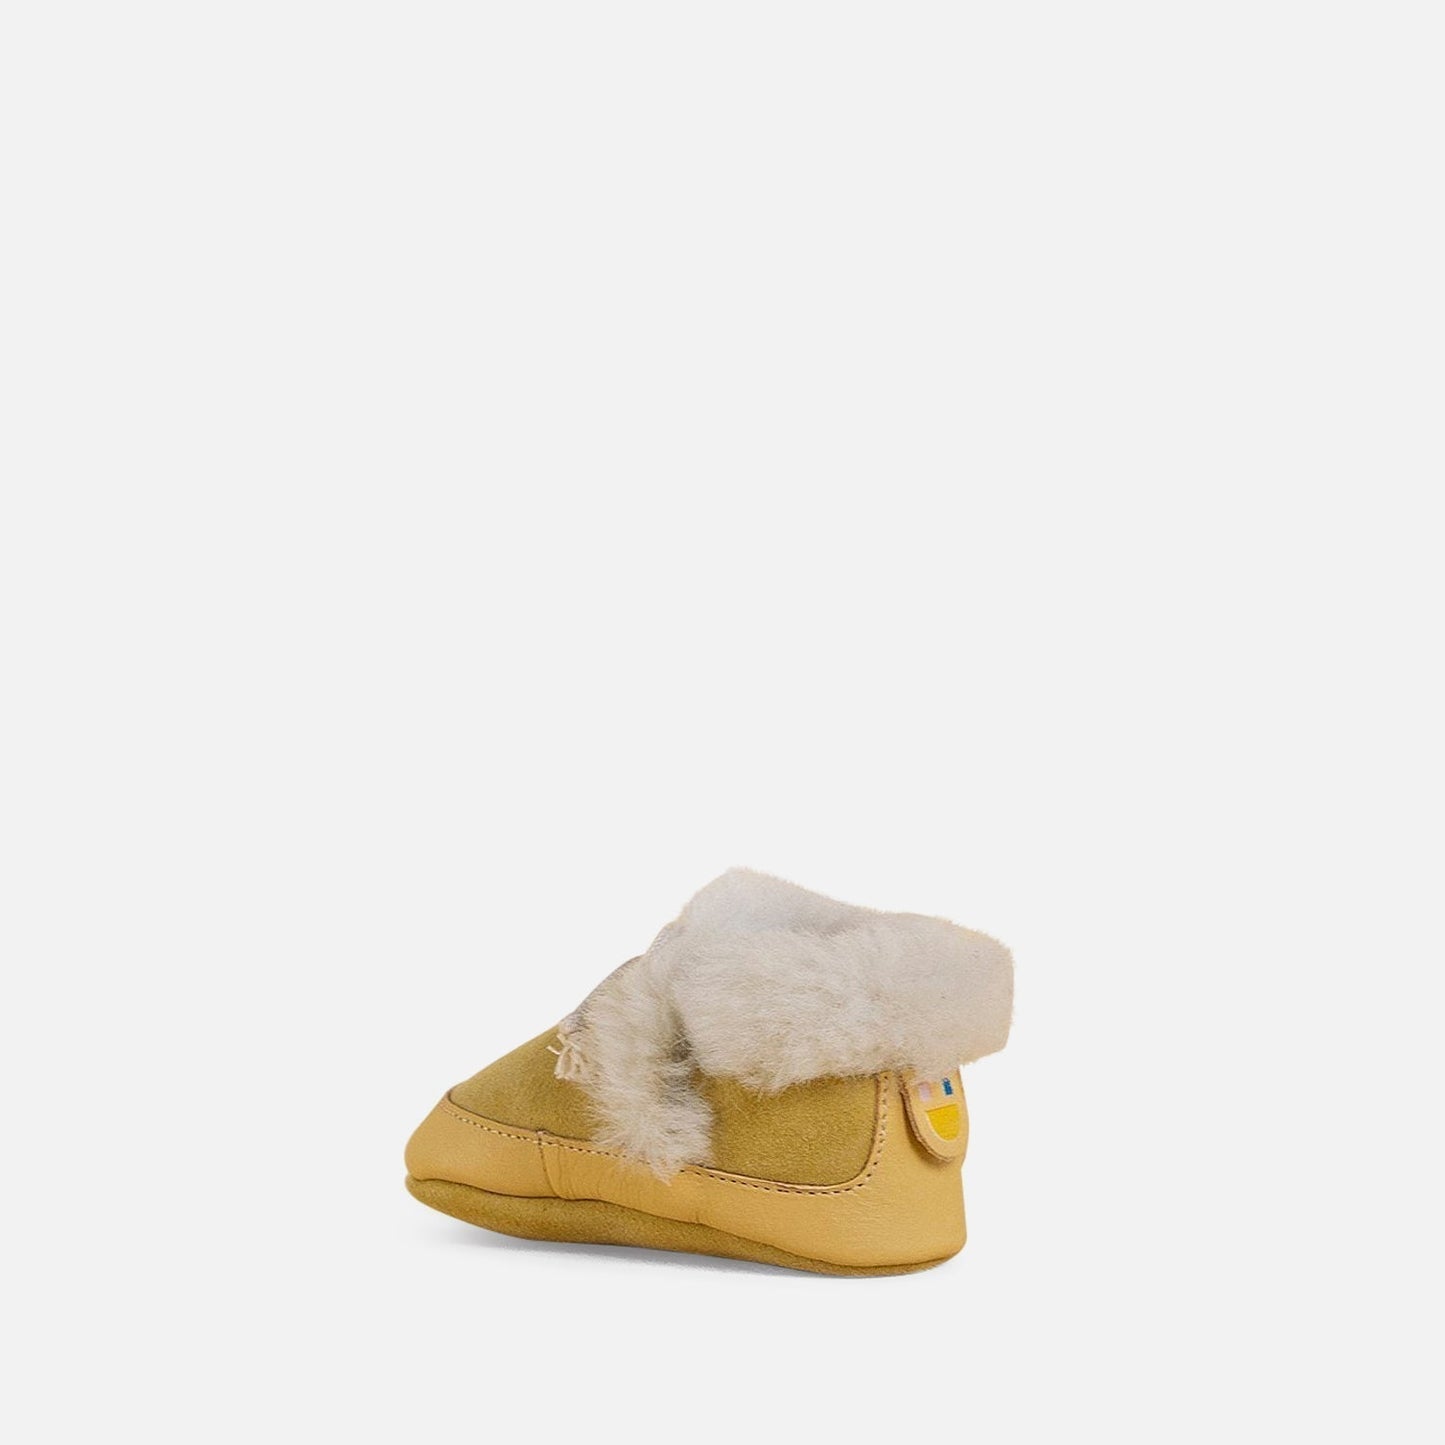 Yellow Fuzzy Booties Shoes & Booties Dulis Shoes 